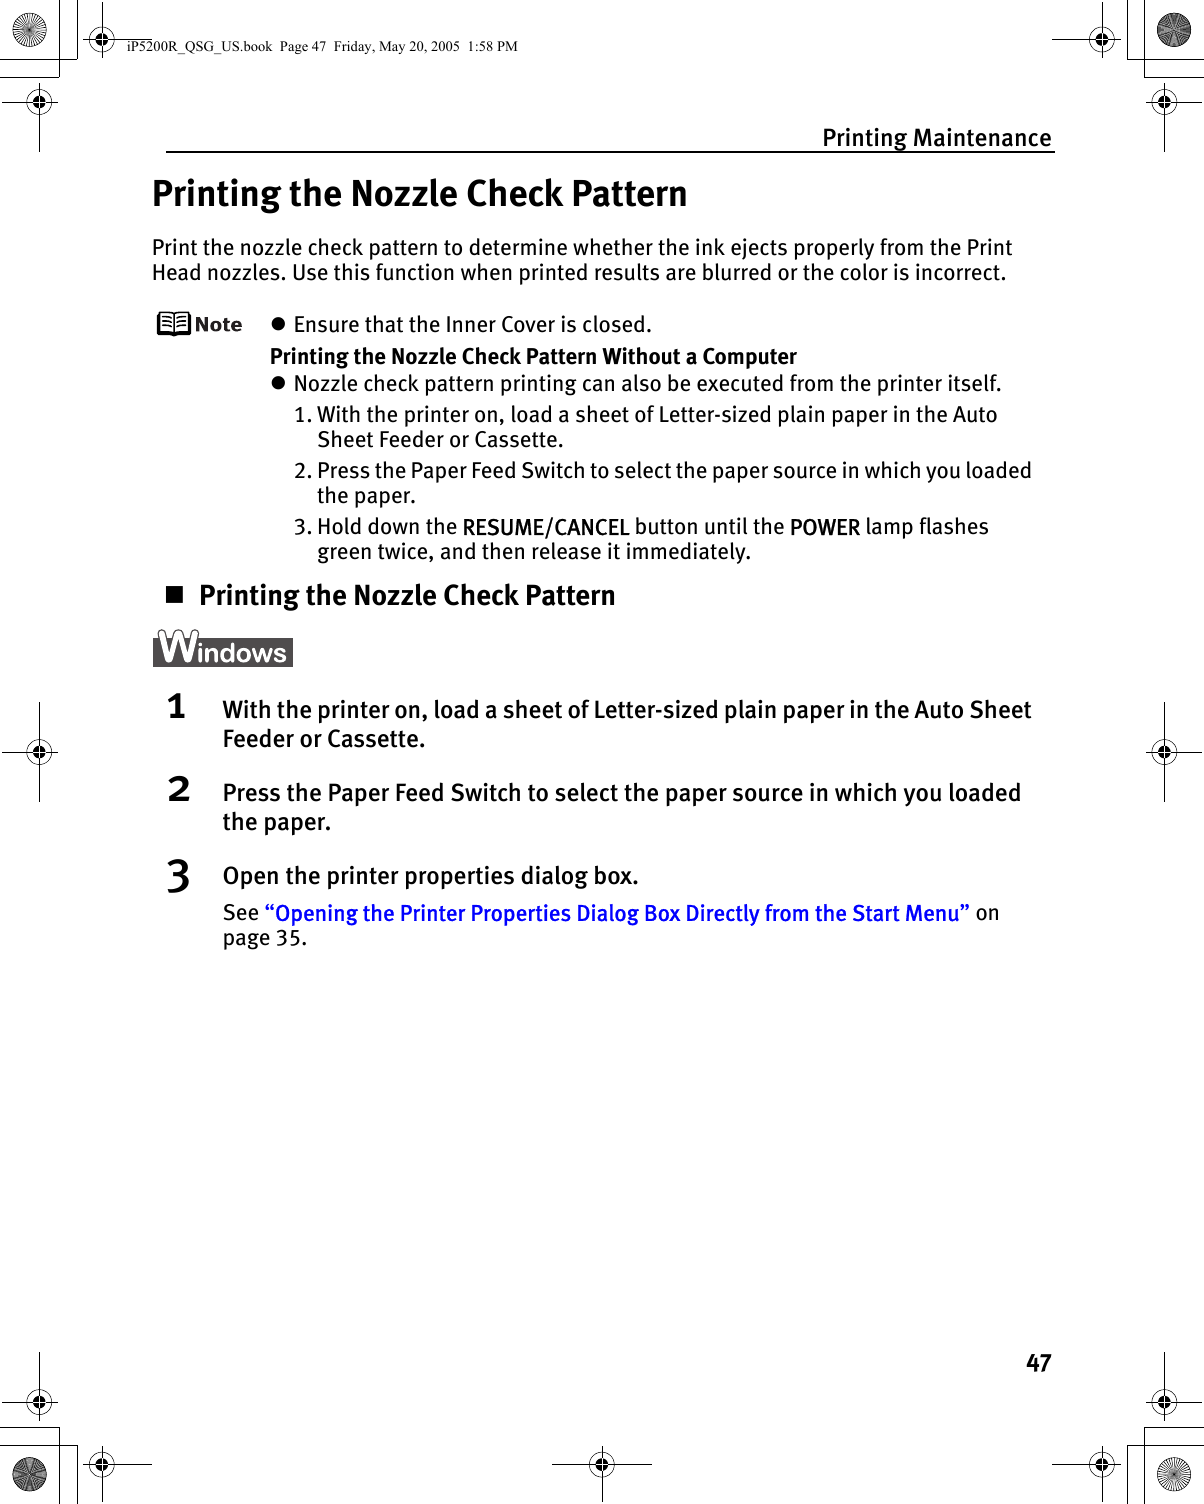 Printing Maintenance47Printing the Nozzle Check PatternPrint the nozzle check pattern to determine whether the ink ejects properly from the Print Head nozzles. Use this function when printed results are blurred or the color is incorrect.zEnsure that the Inner Cover is closed.Printing the Nozzle Check Pattern Without a ComputerzNozzle check pattern printing can also be executed from the printer itself. 1. With the printer on, load a sheet of Letter-sized plain paper in the Auto Sheet Feeder or Cassette. 2. Press the Paper Feed Switch to select the paper source in which you loaded the paper.3. Hold down the RESUME/CANCEL button until the POWER lamp flashes green twice, and then release it immediately.Printing the Nozzle Check Pattern1With the printer on, load a sheet of Letter-sized plain paper in the Auto Sheet Feeder or Cassette.2Press the Paper Feed Switch to select the paper source in which you loaded the paper.3Open the printer properties dialog box.See “Opening the Printer Properties Dialog Box Directly from the Start Menu” on page 35.iP5200R_QSG_US.book  Page 47  Friday, May 20, 2005  1:58 PM